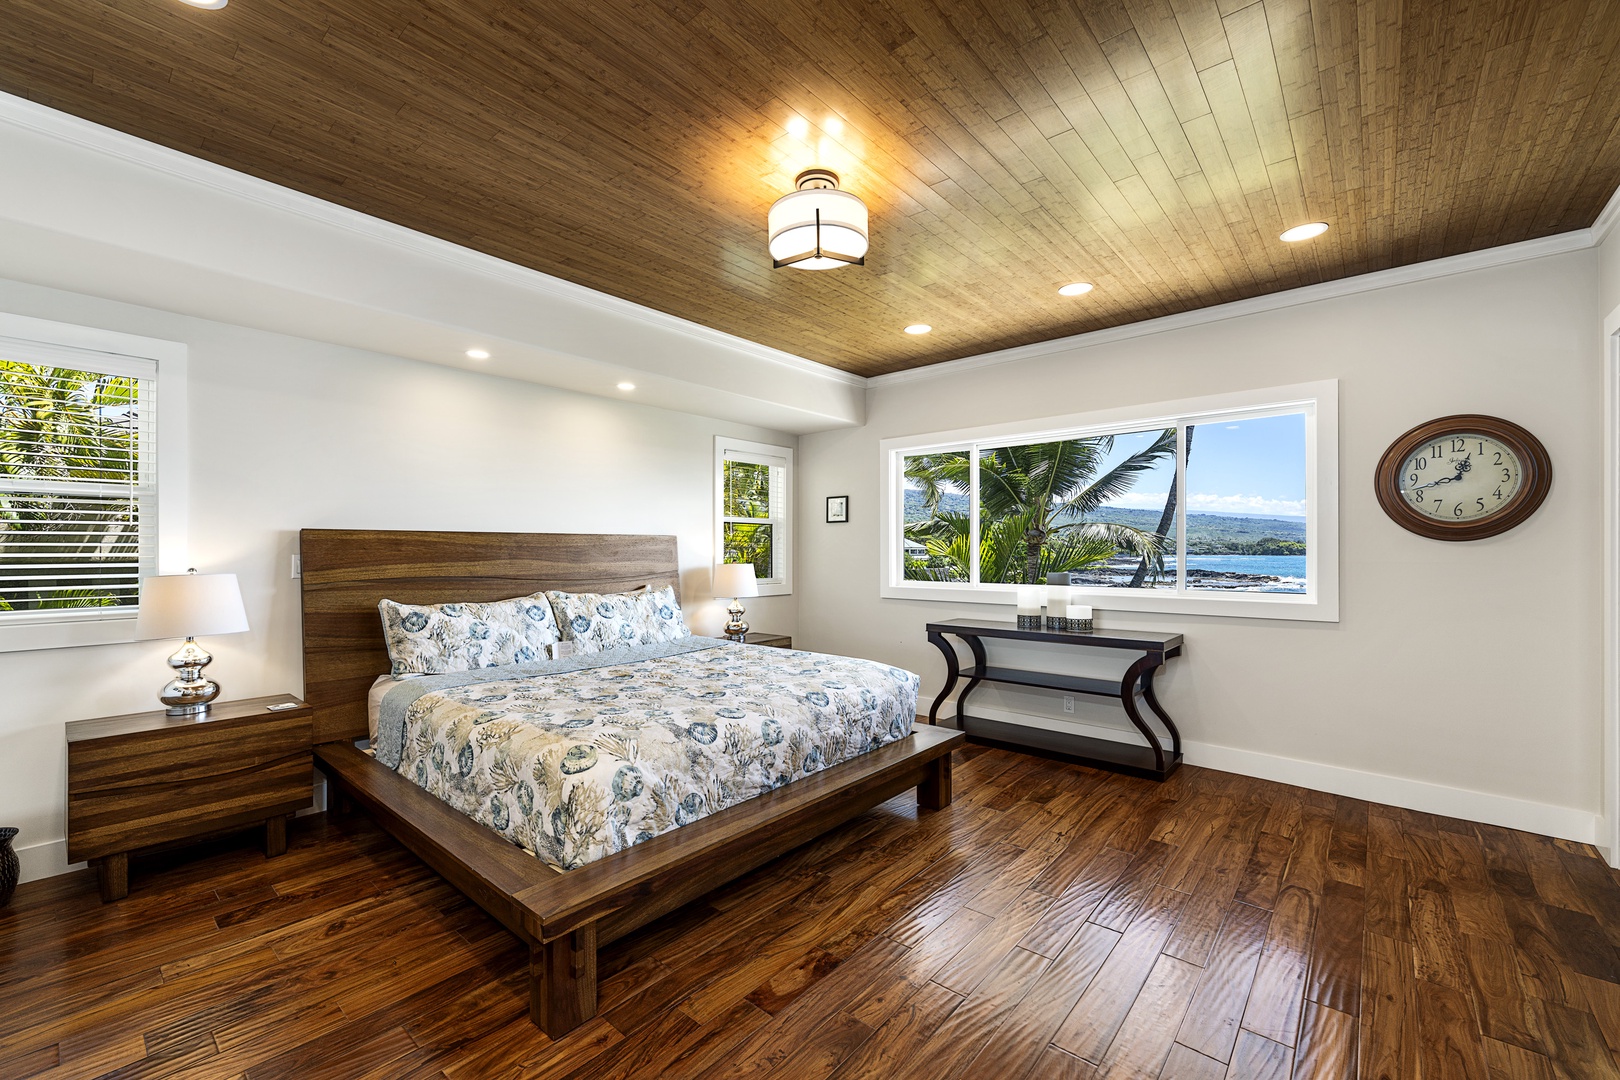 Kailua Kona Vacation Rentals, Ali'i Point #7 - The primary bedroom, with king size bed, is located upstairs